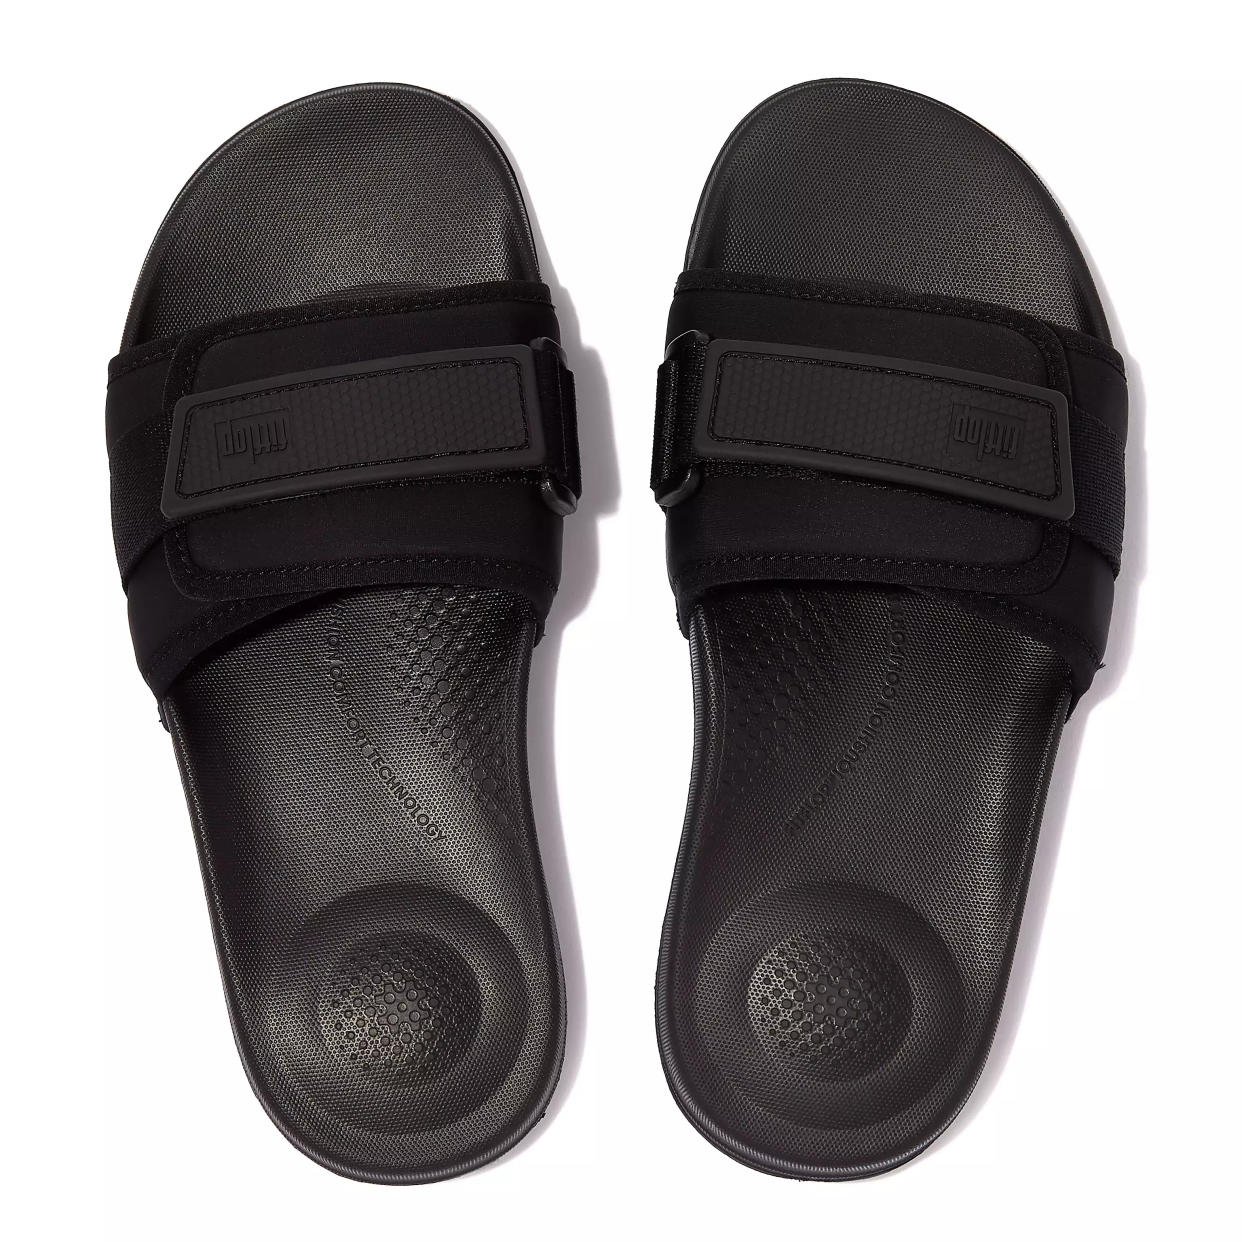 iQUSHION Adjustable Water-Resistant Slides (DIFFBOT)